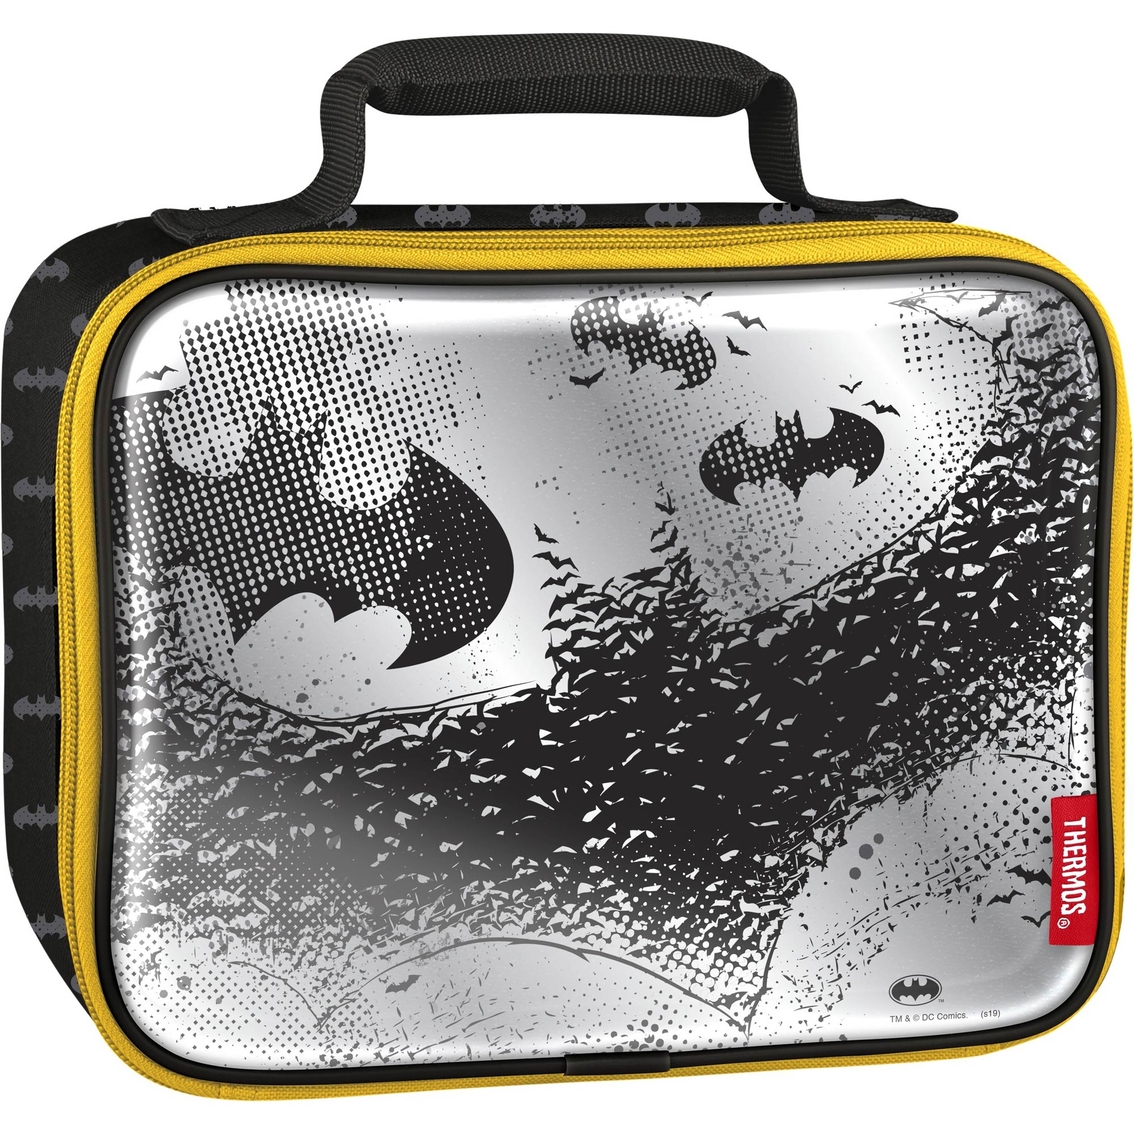 Thermos Batman Lunch Kit, Lunch Bags, Sports & Outdoors